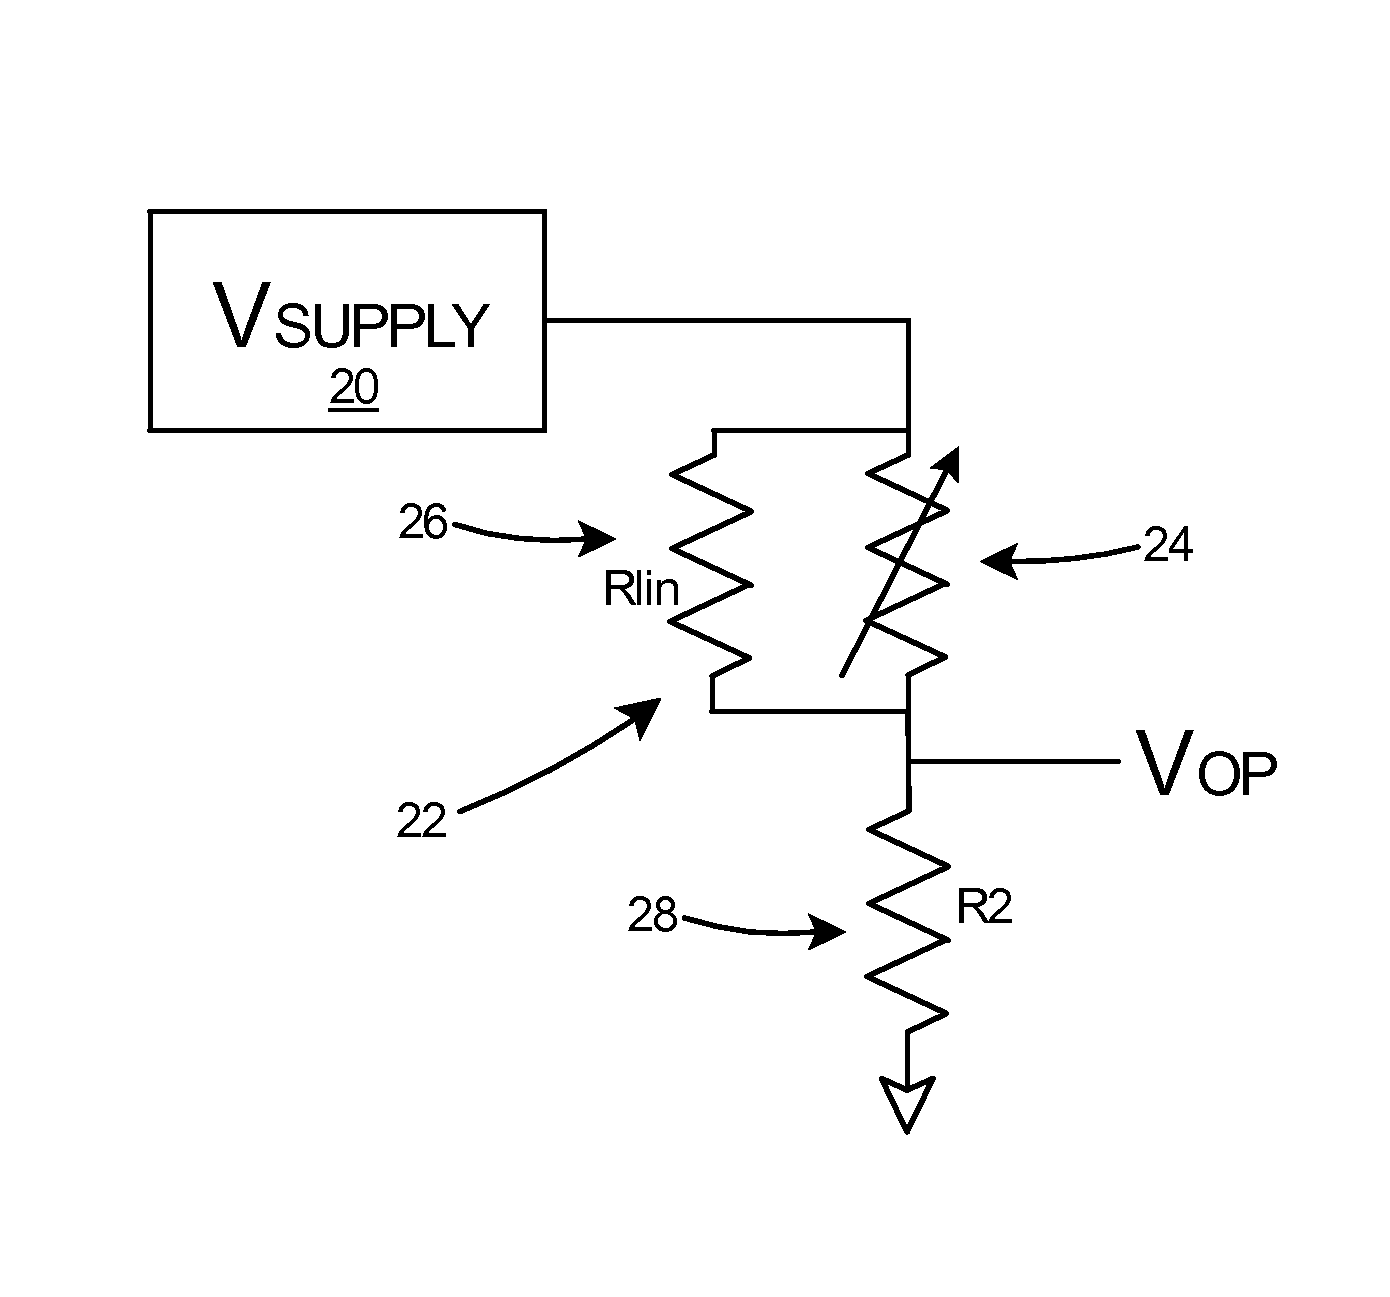 Method for passively compensating for temperature coefficient of gain in silicon photomultipliers and similar devices